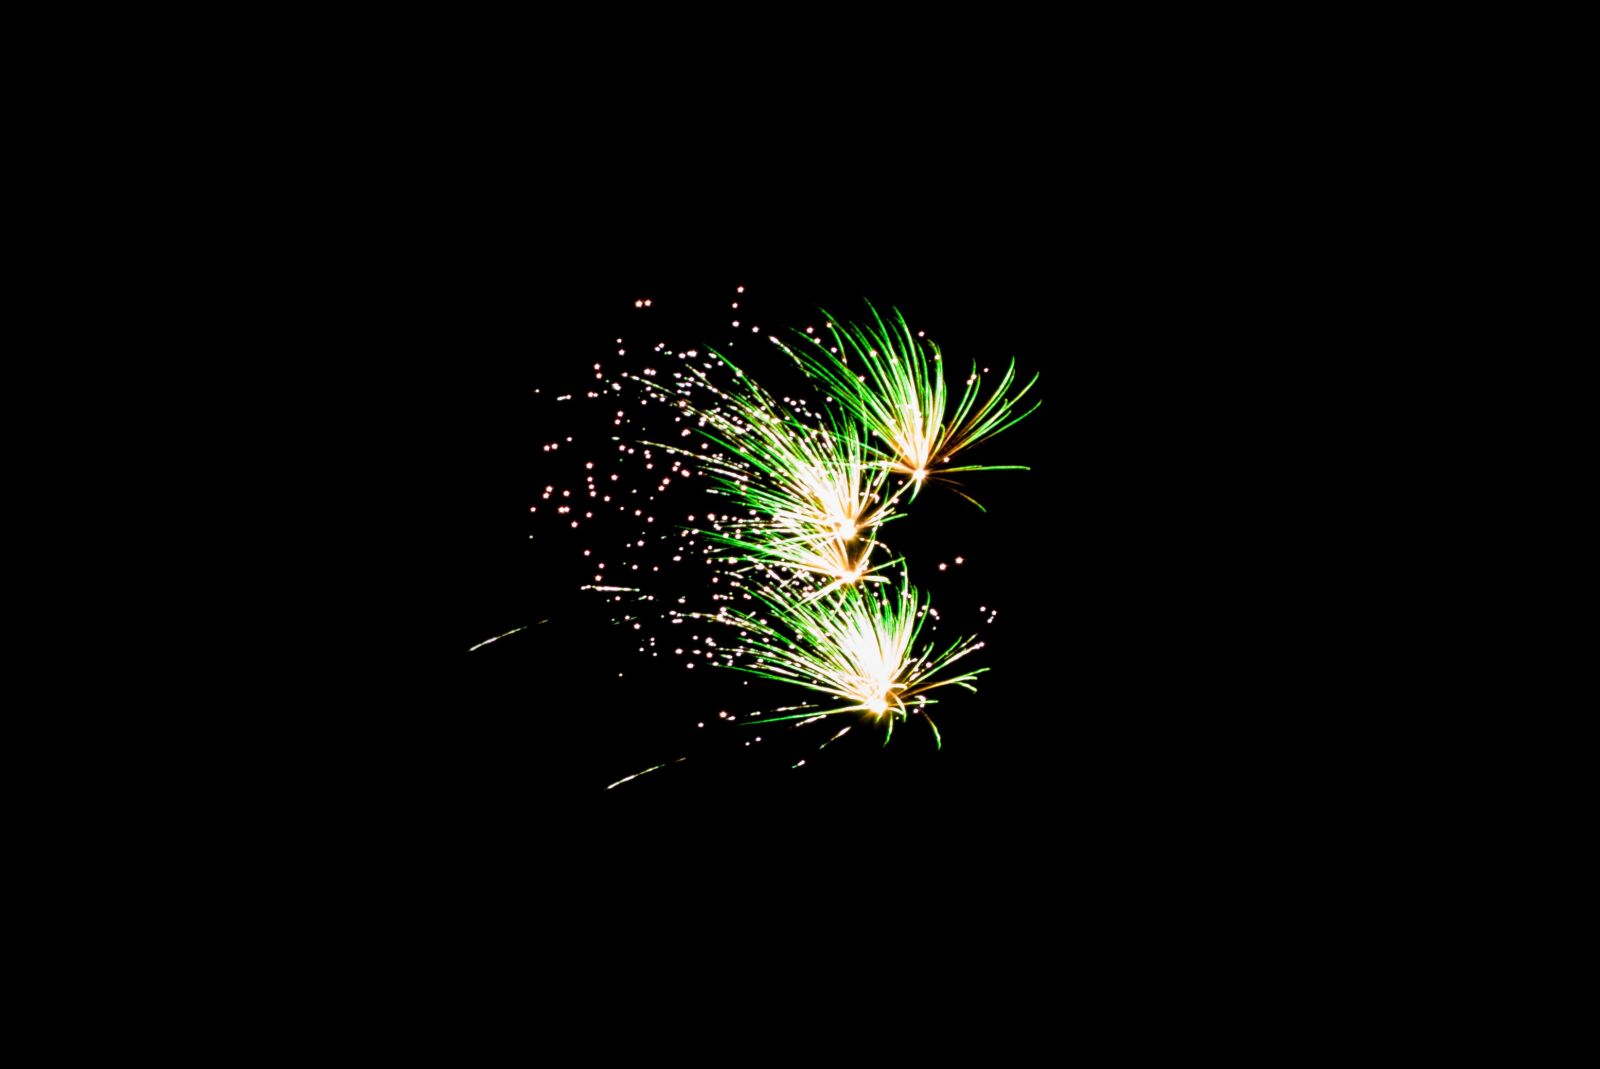 EF80-200mm f/4.5-5.6 sample photo. Fireworks, the darkness, the photography